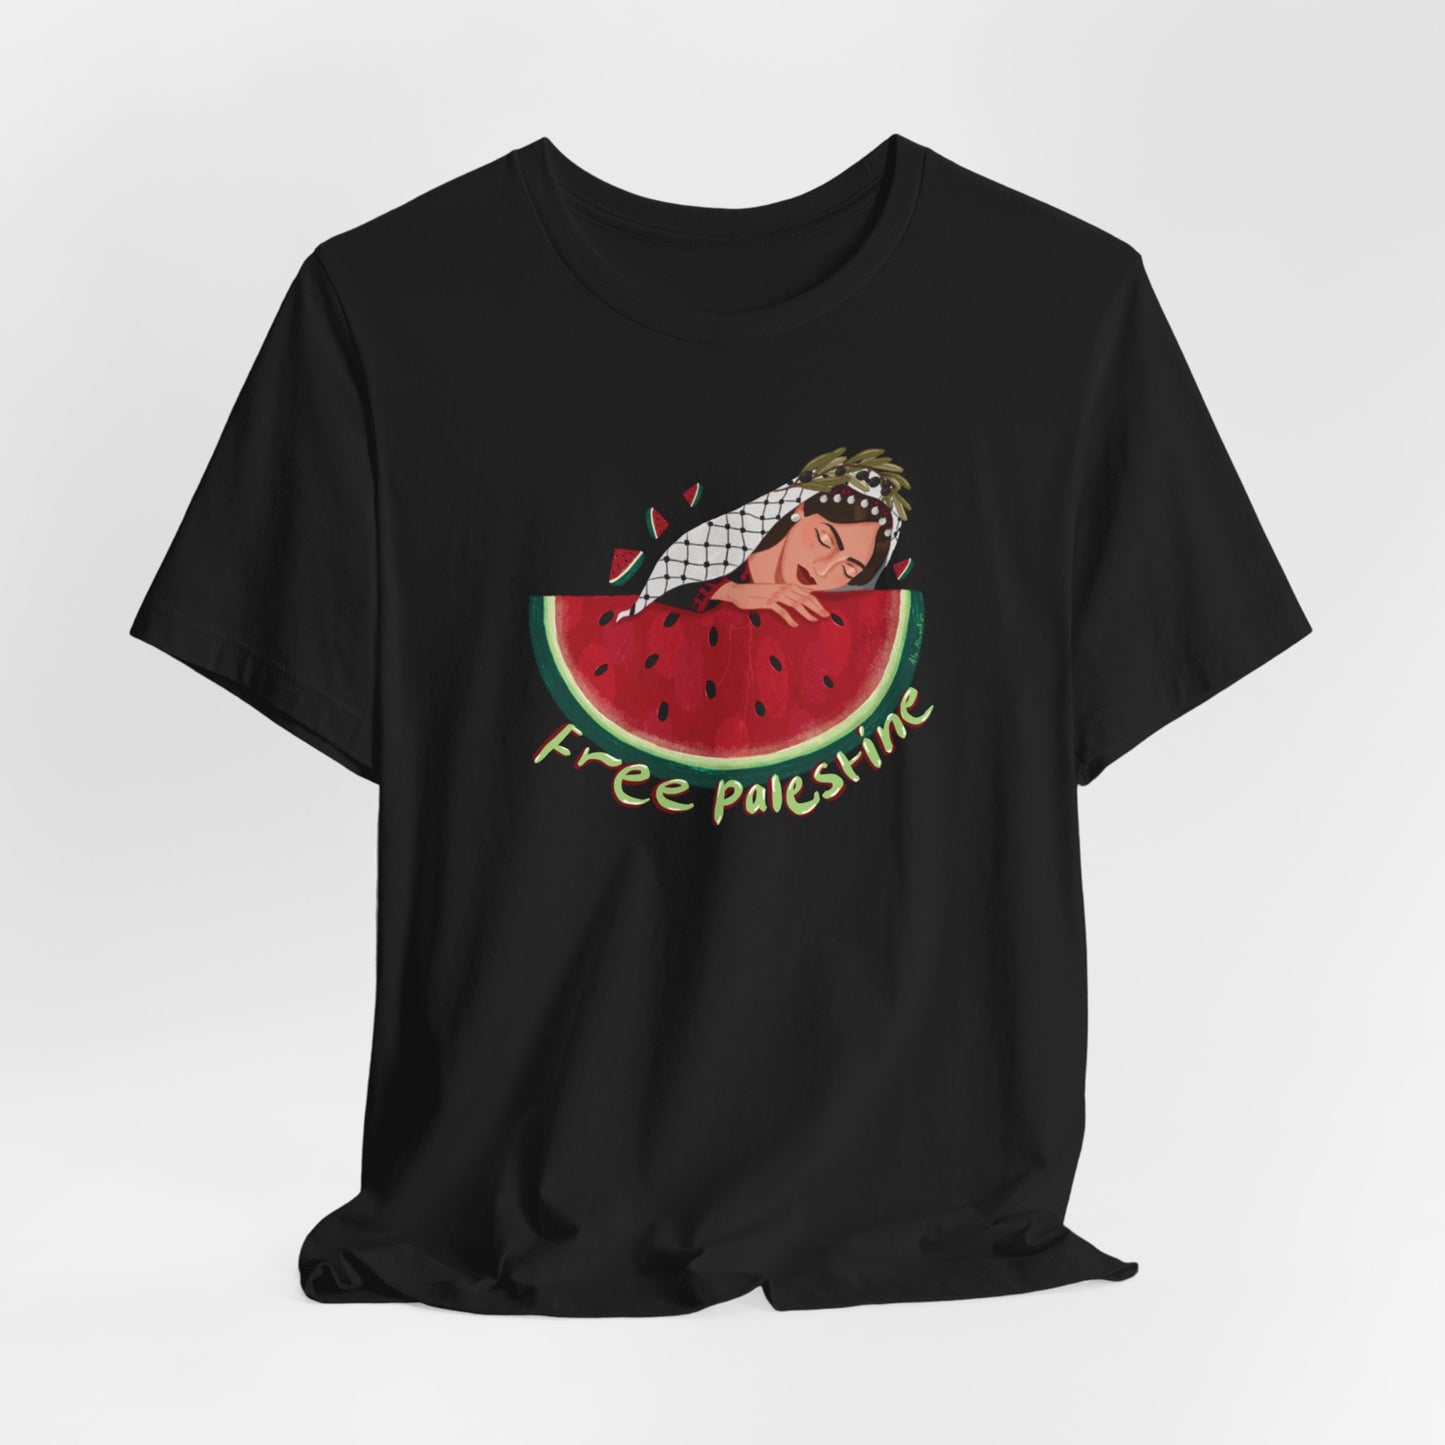 Adult | Support Palestinian Artists | Design By Ala | Short Sleeve Tee